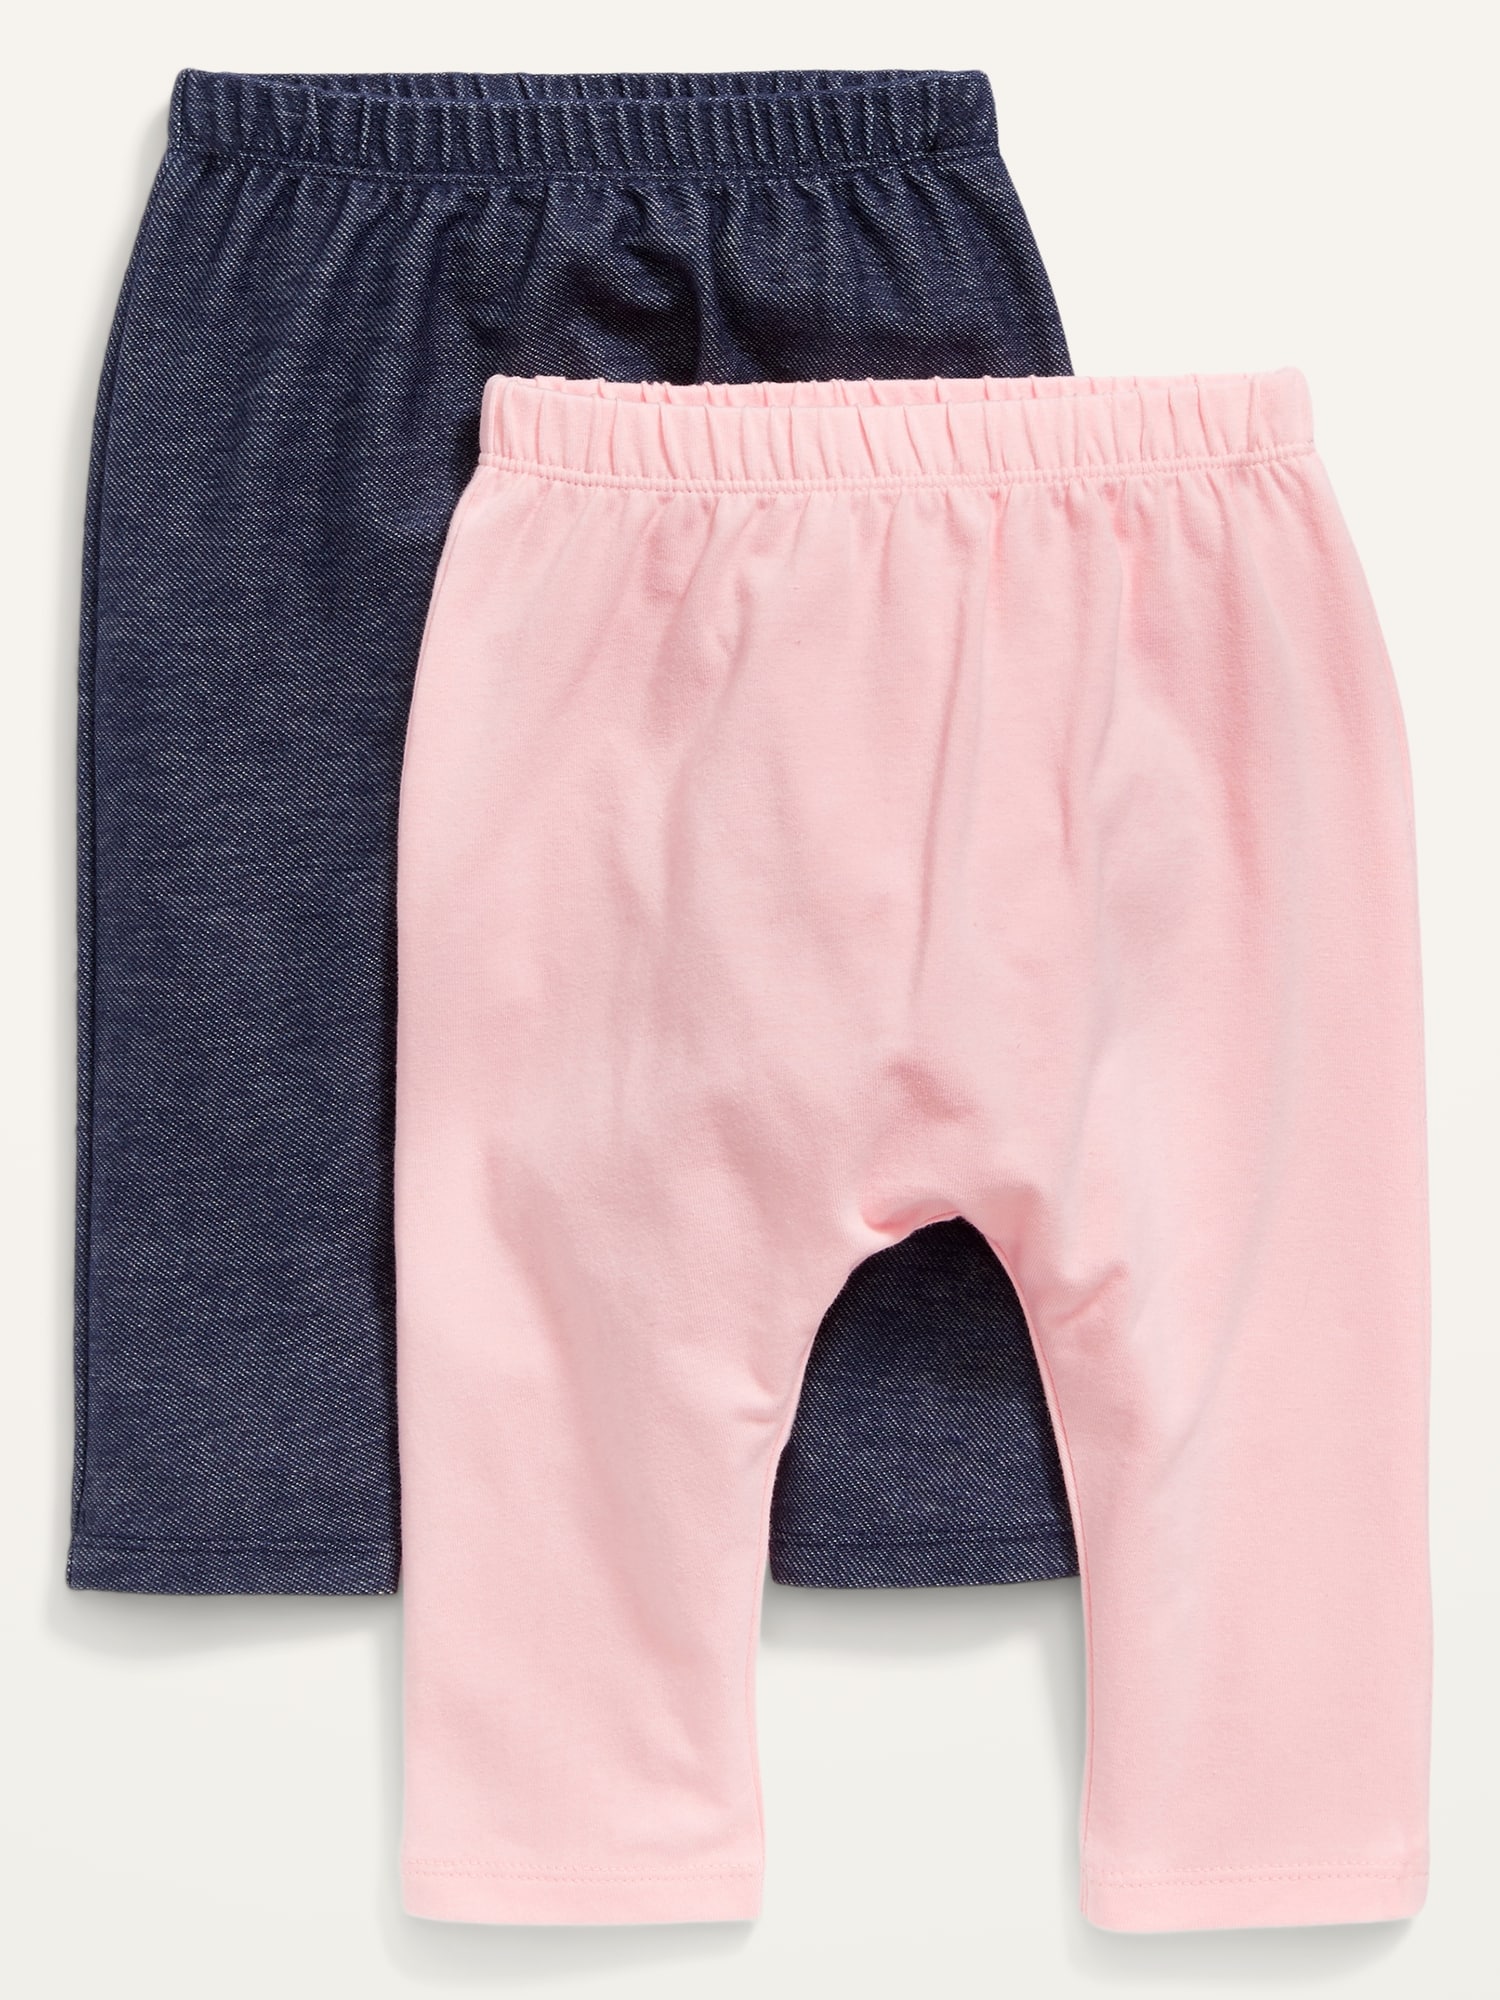 Unisex U-Shaped Pull-On Pants 2-Pack for Baby | Old Navy